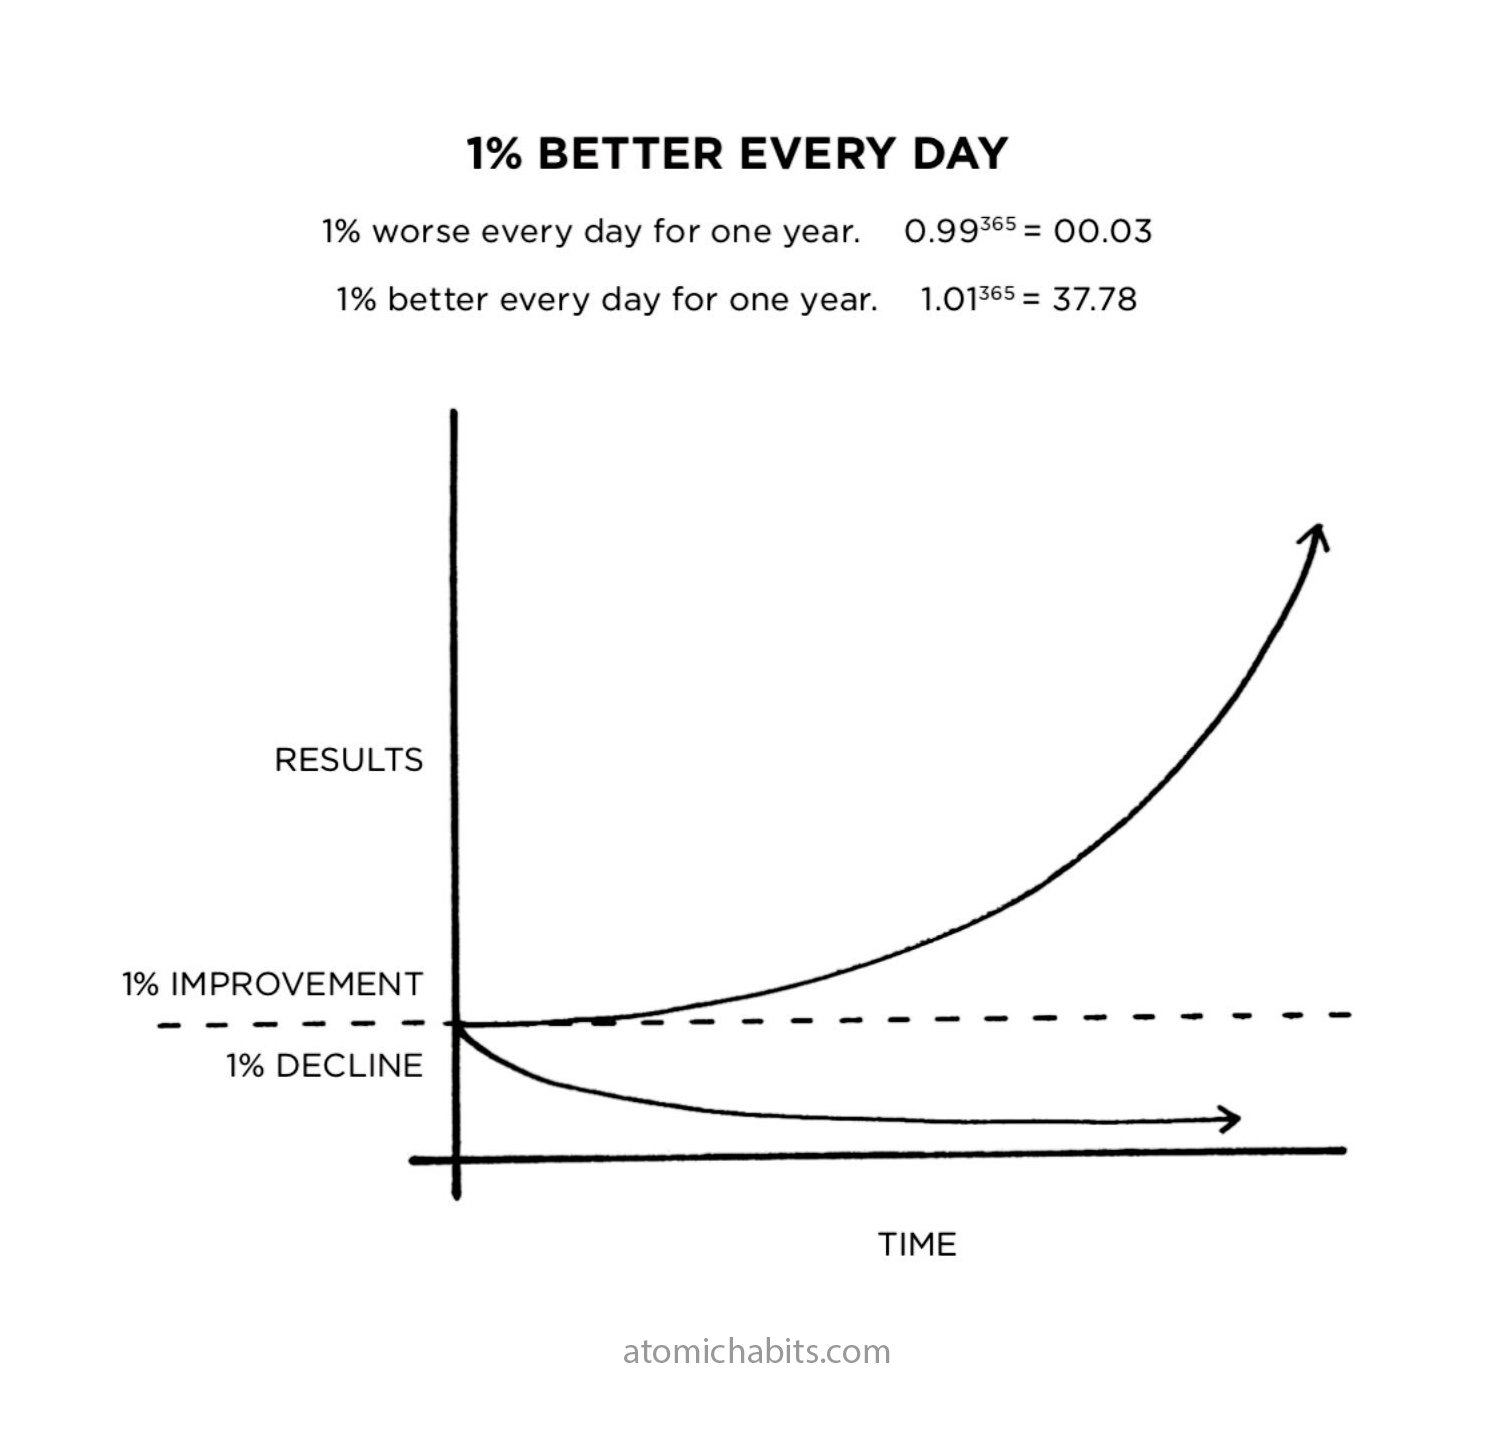 compound interest diagram from atomic habits